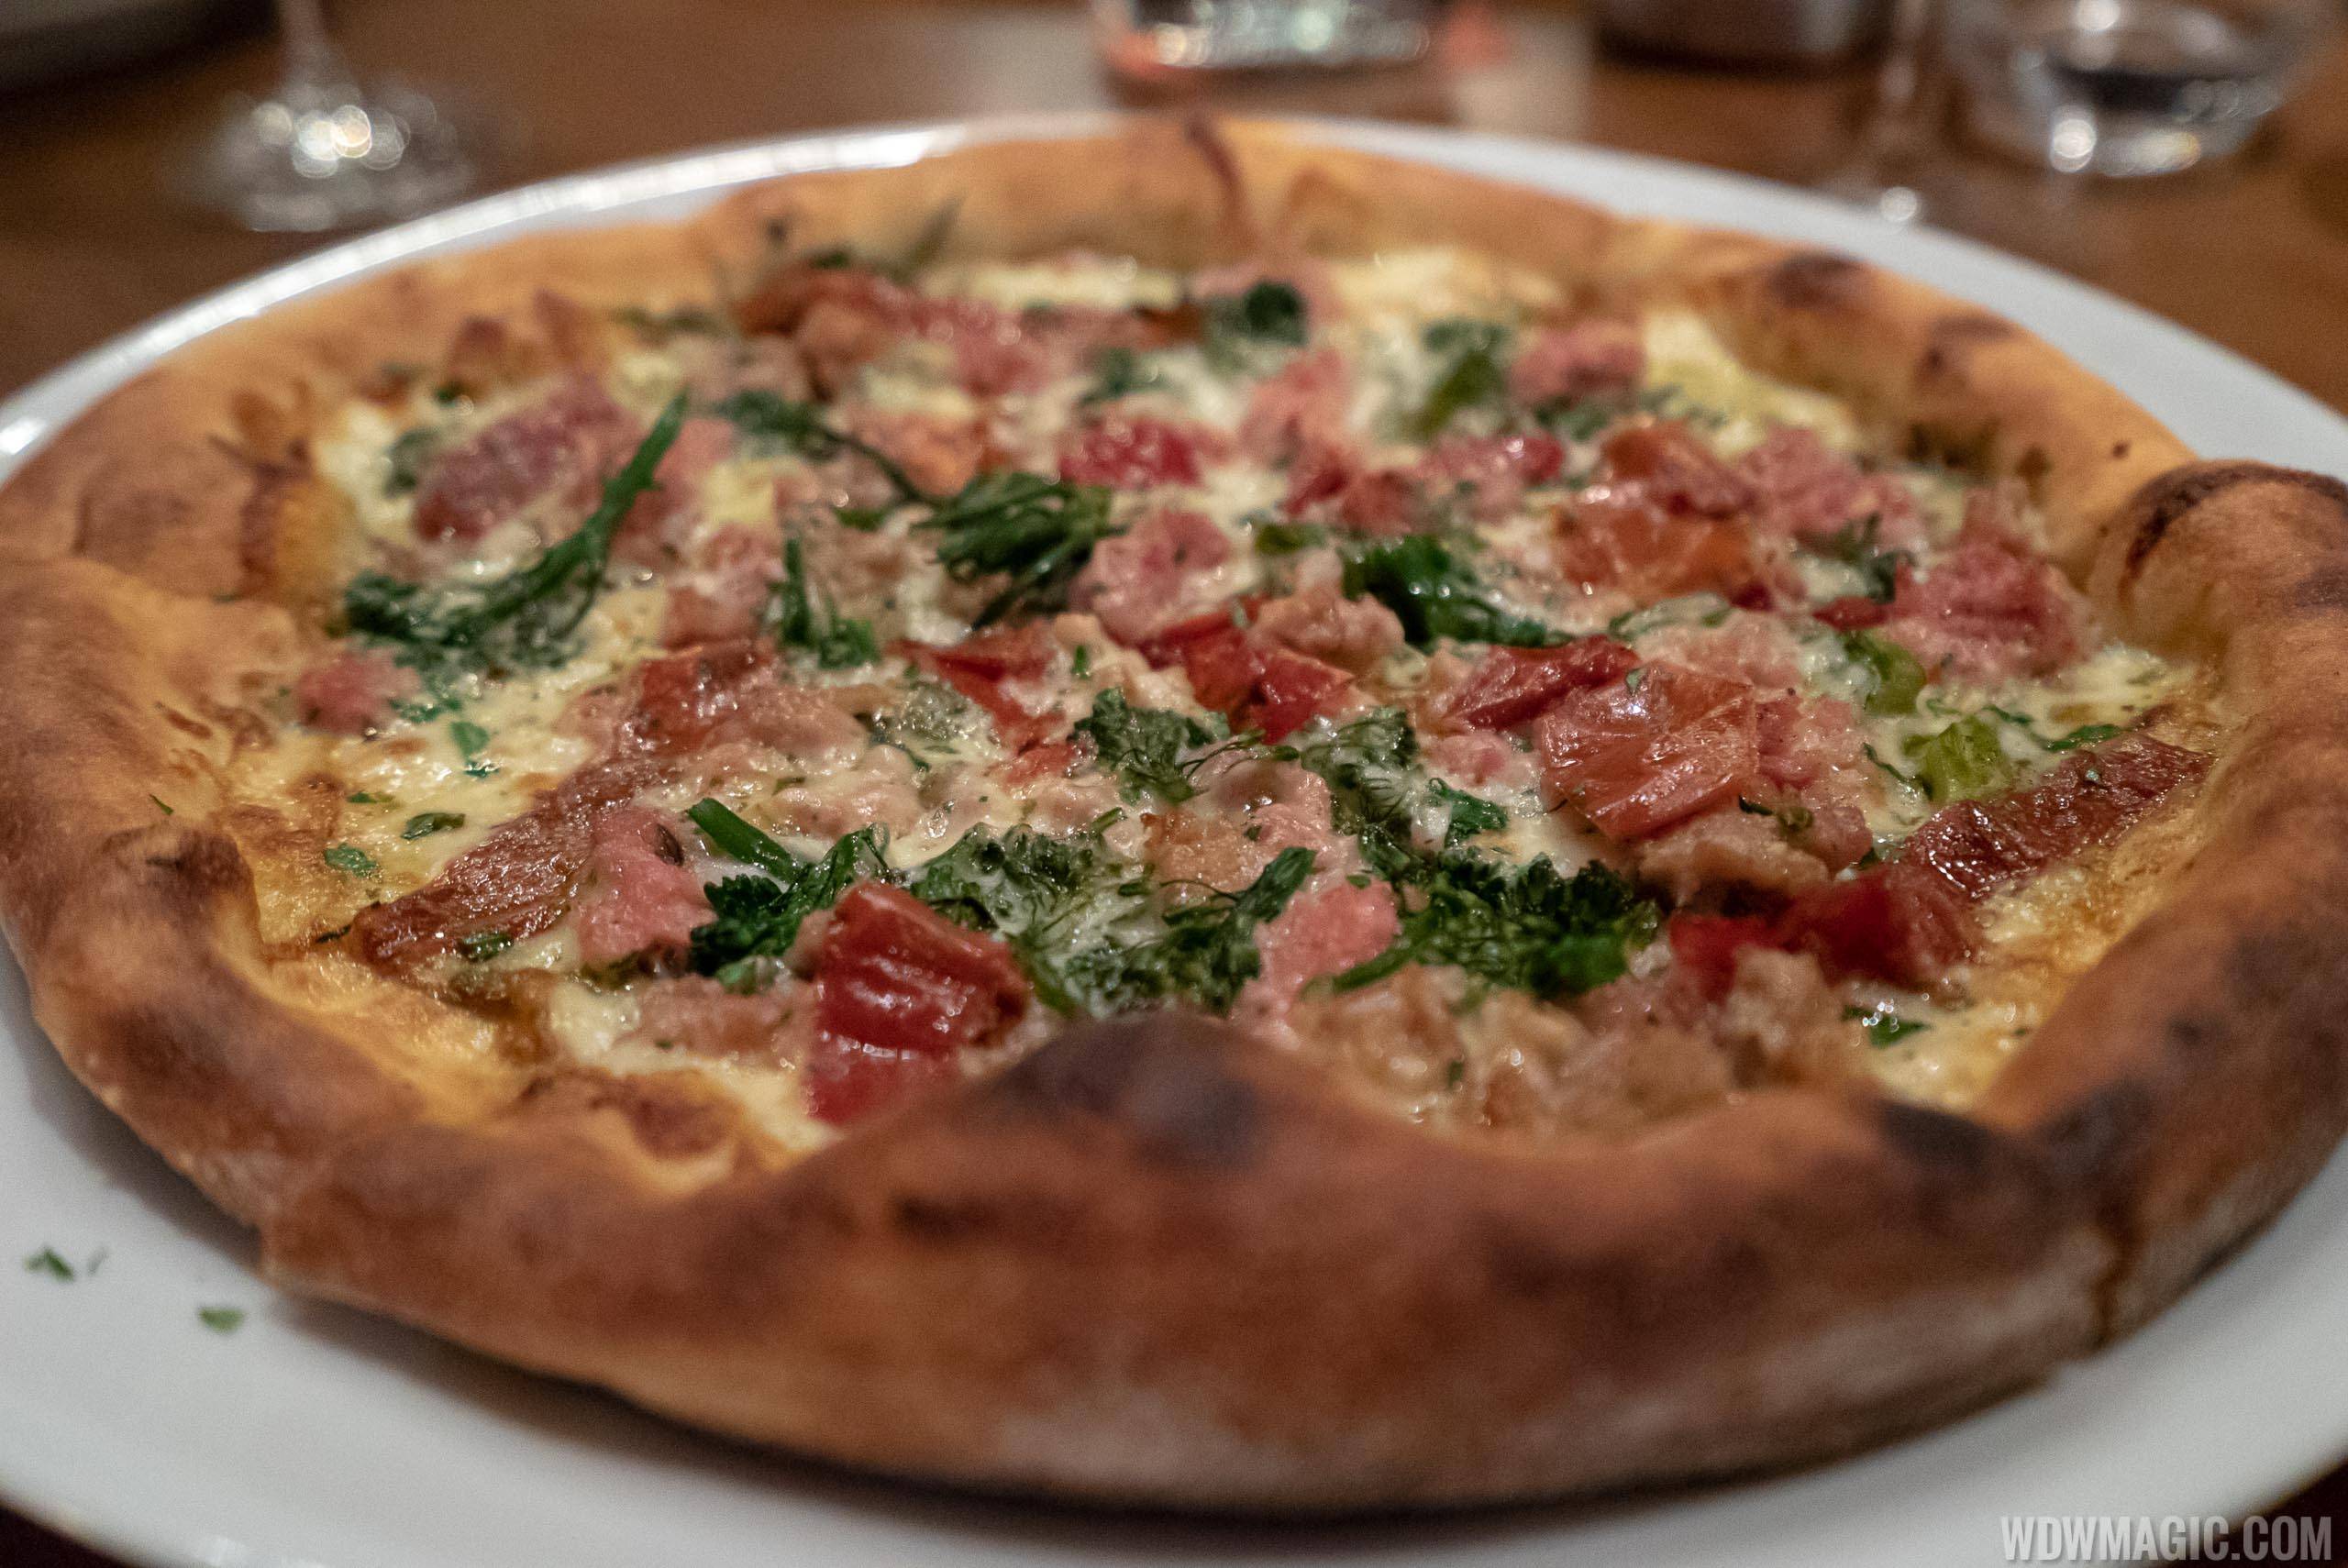 Wolfgang Puck Bar and Grill - Fennel Sausage Pizza